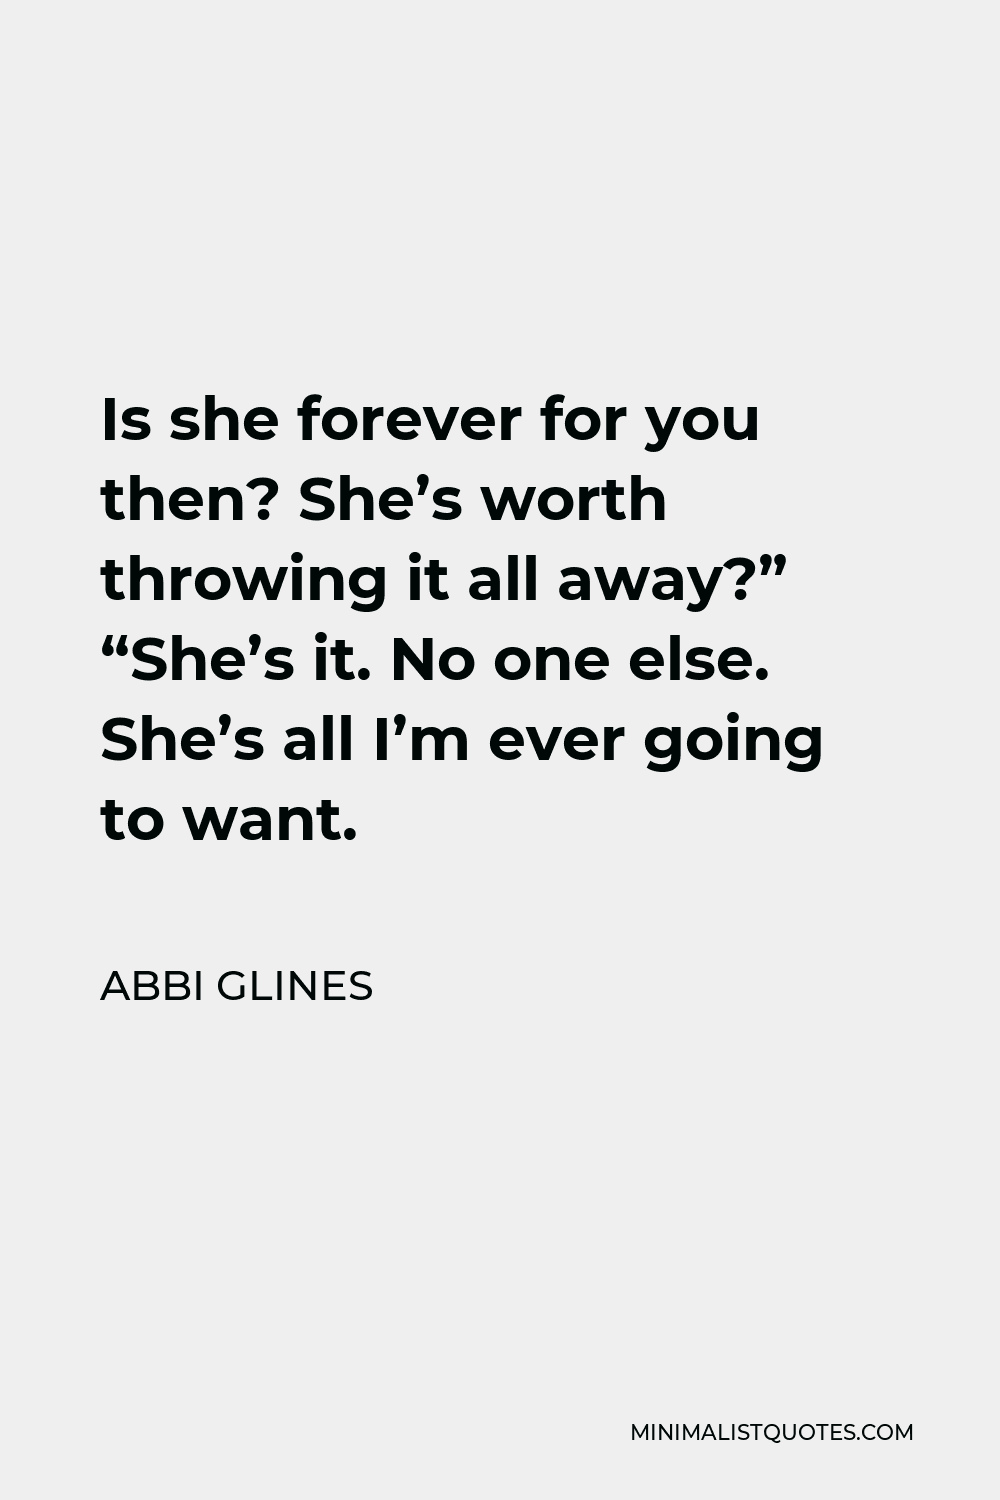 Abbi Glines Quote - Is she forever for you then? She’s worth throwing it all away?” “She’s it. No one else. She’s all I’m ever going to want.